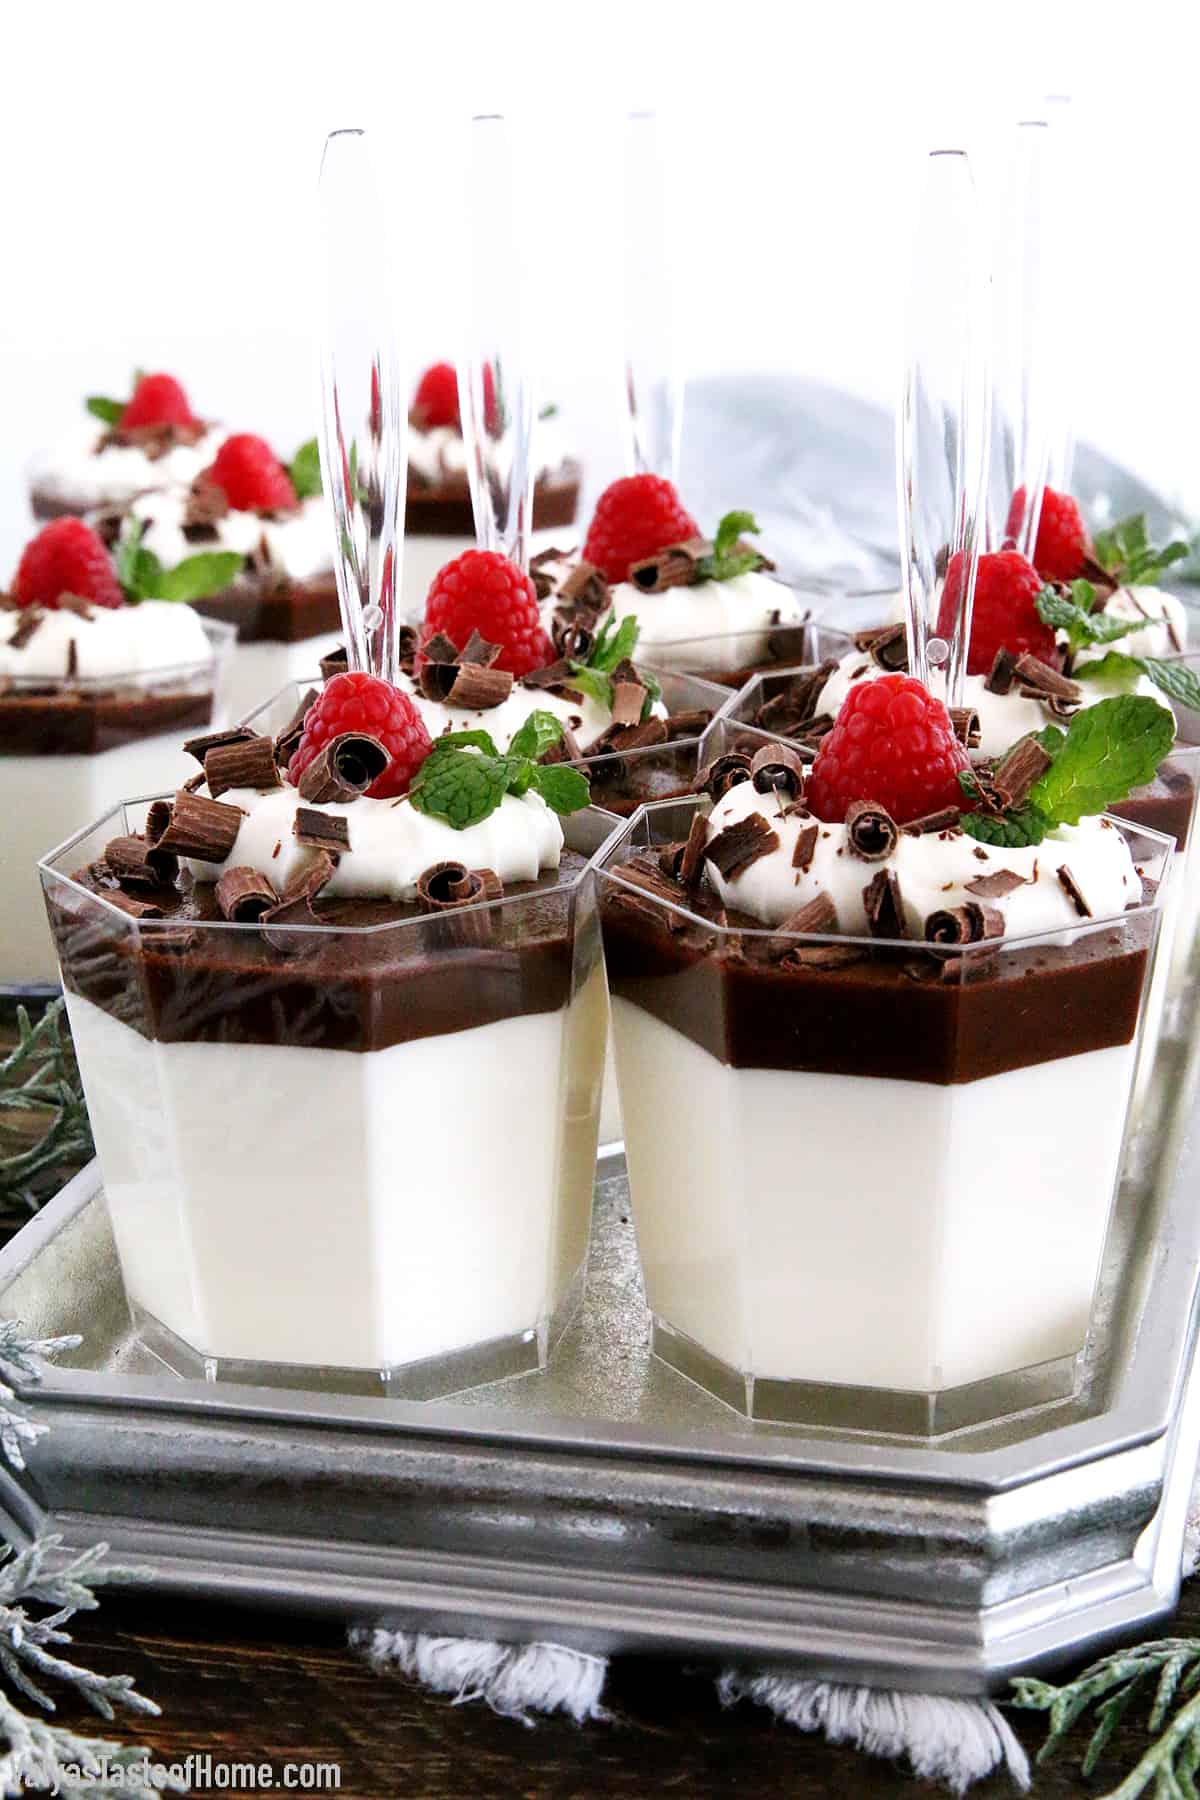 This dessert takes a bit more effort than some others, but the result is definitely worth it!